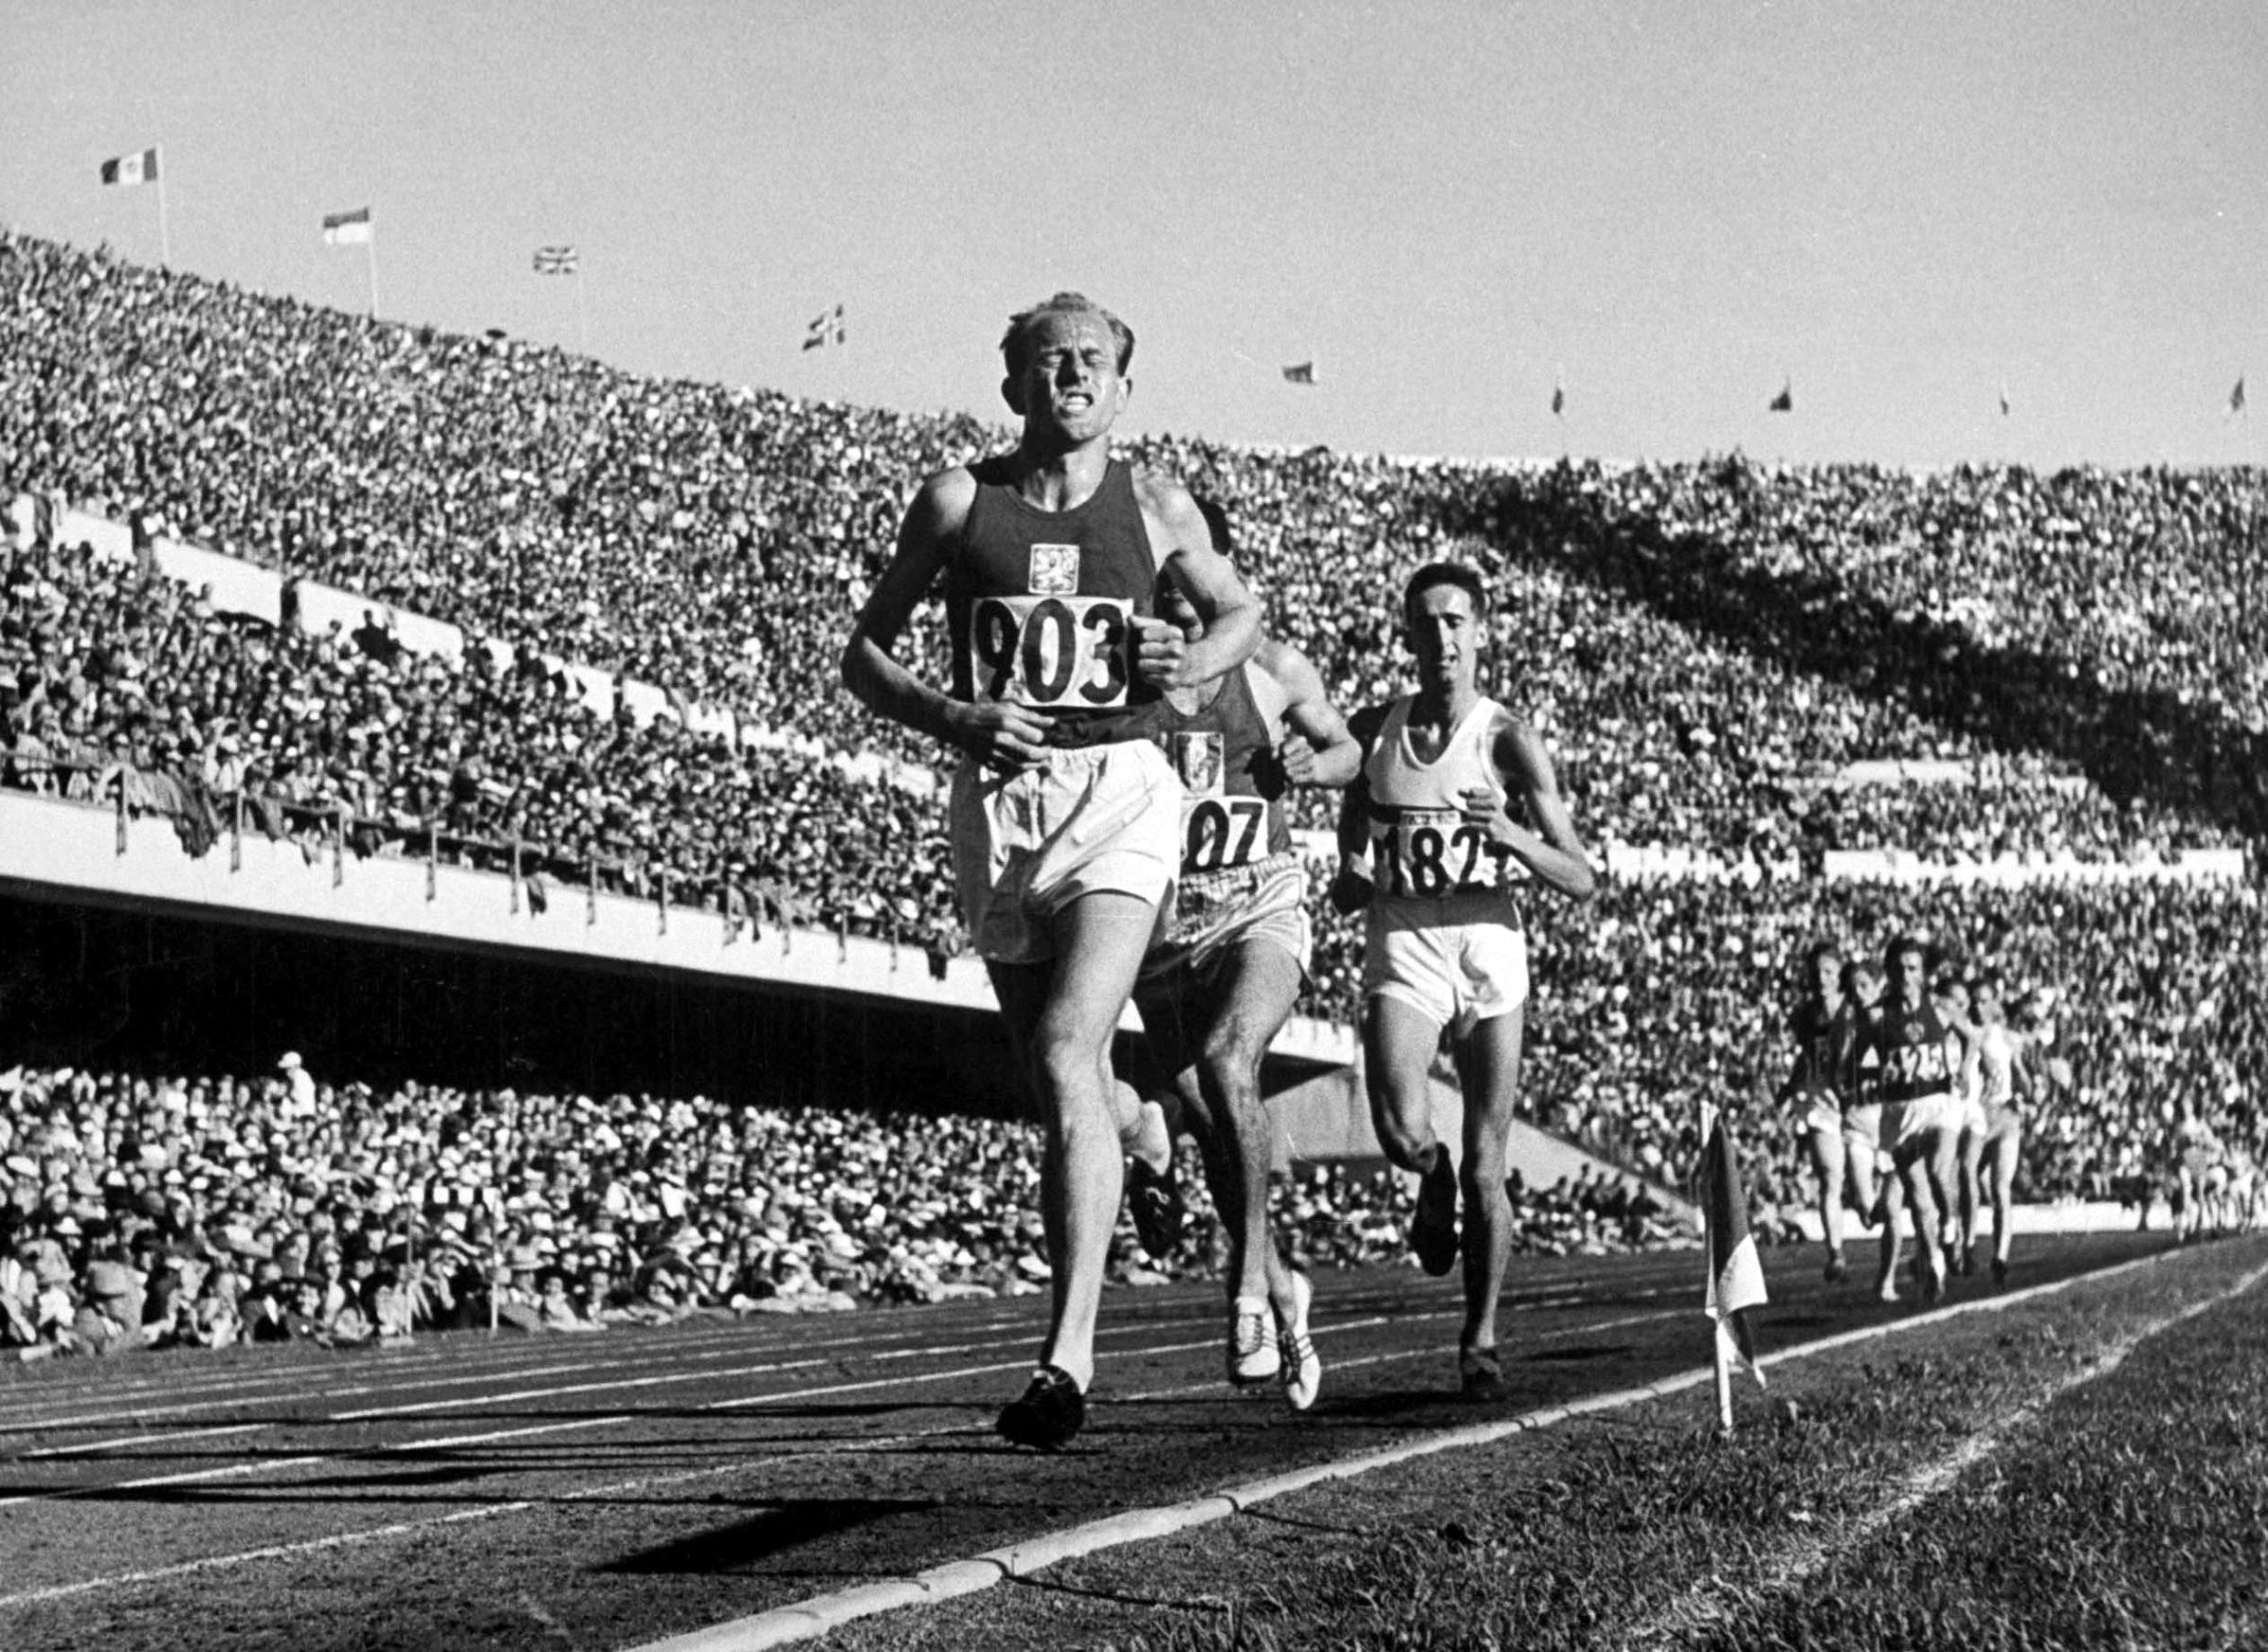 Czech track and field gold medalist Emil Zatopek leading pack during the 1952 Olympic games in Helsinki, Finland.